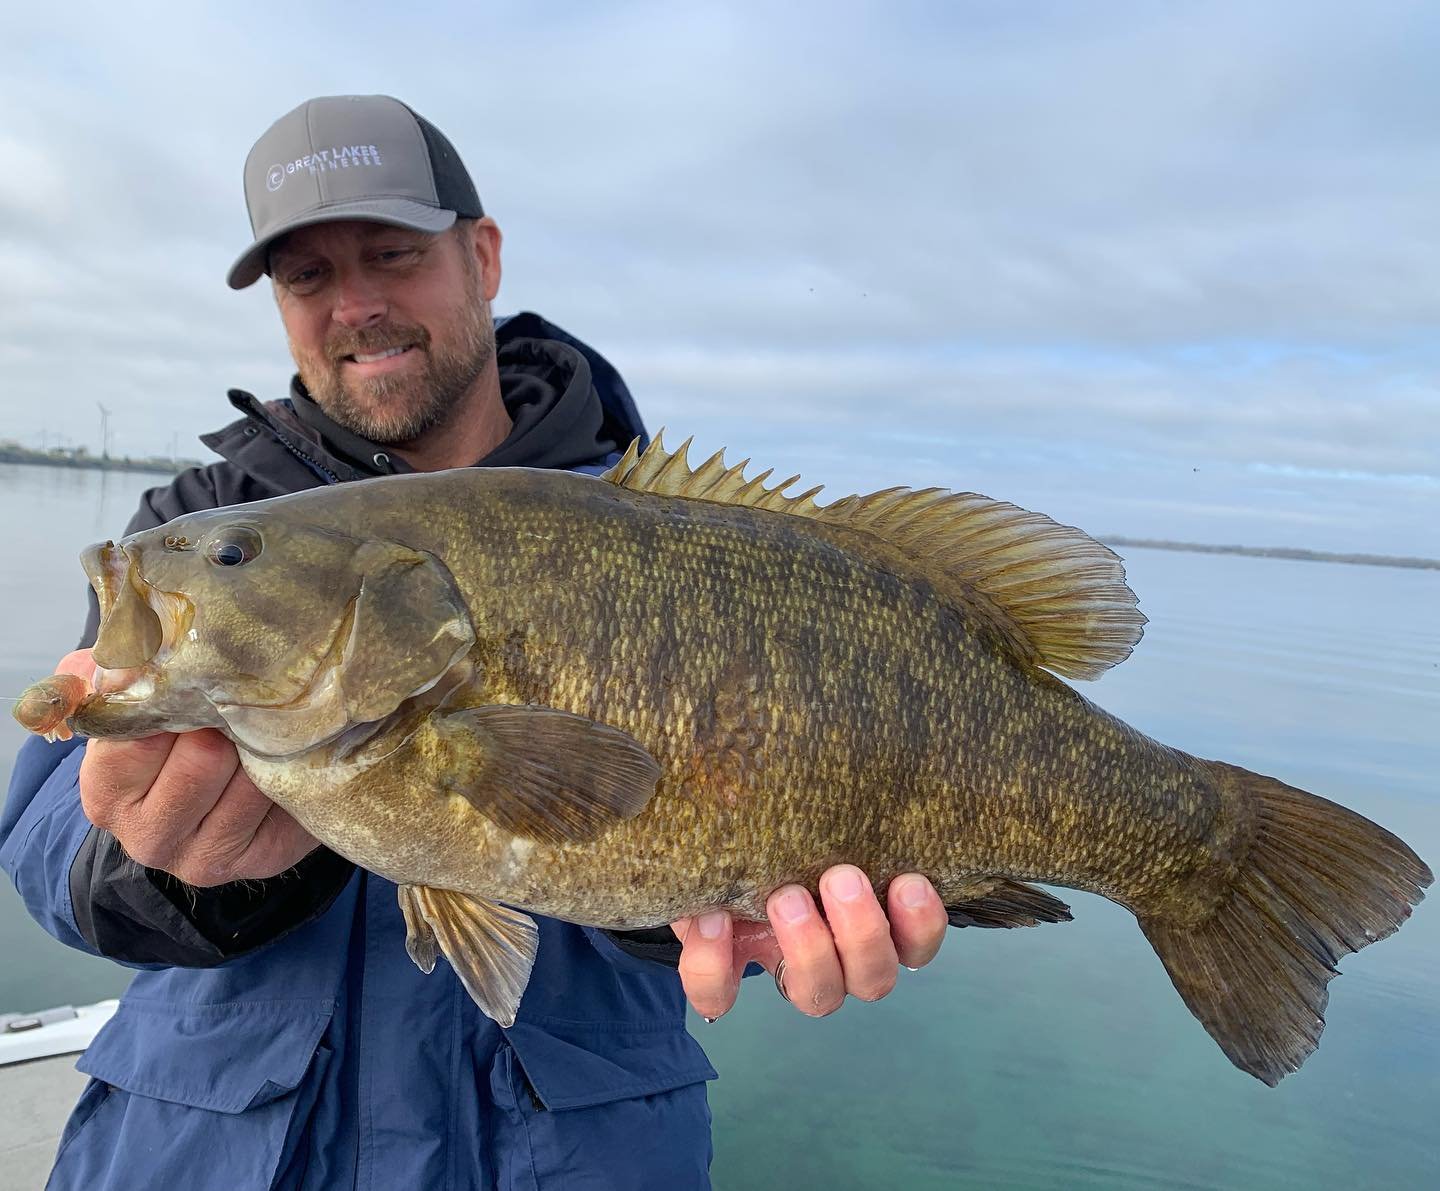 🚨7.2lbr Smallmouth Alert! &hellip; Again on the 2.5&rdquo; Juvy Craw tube in motor oil! That color has been ridiculous this year for giant fish. This one was paired with our 1/4oz Mini Pro Tube Head 

Buy at Lurenet.com (@lurenetfishing) or from our